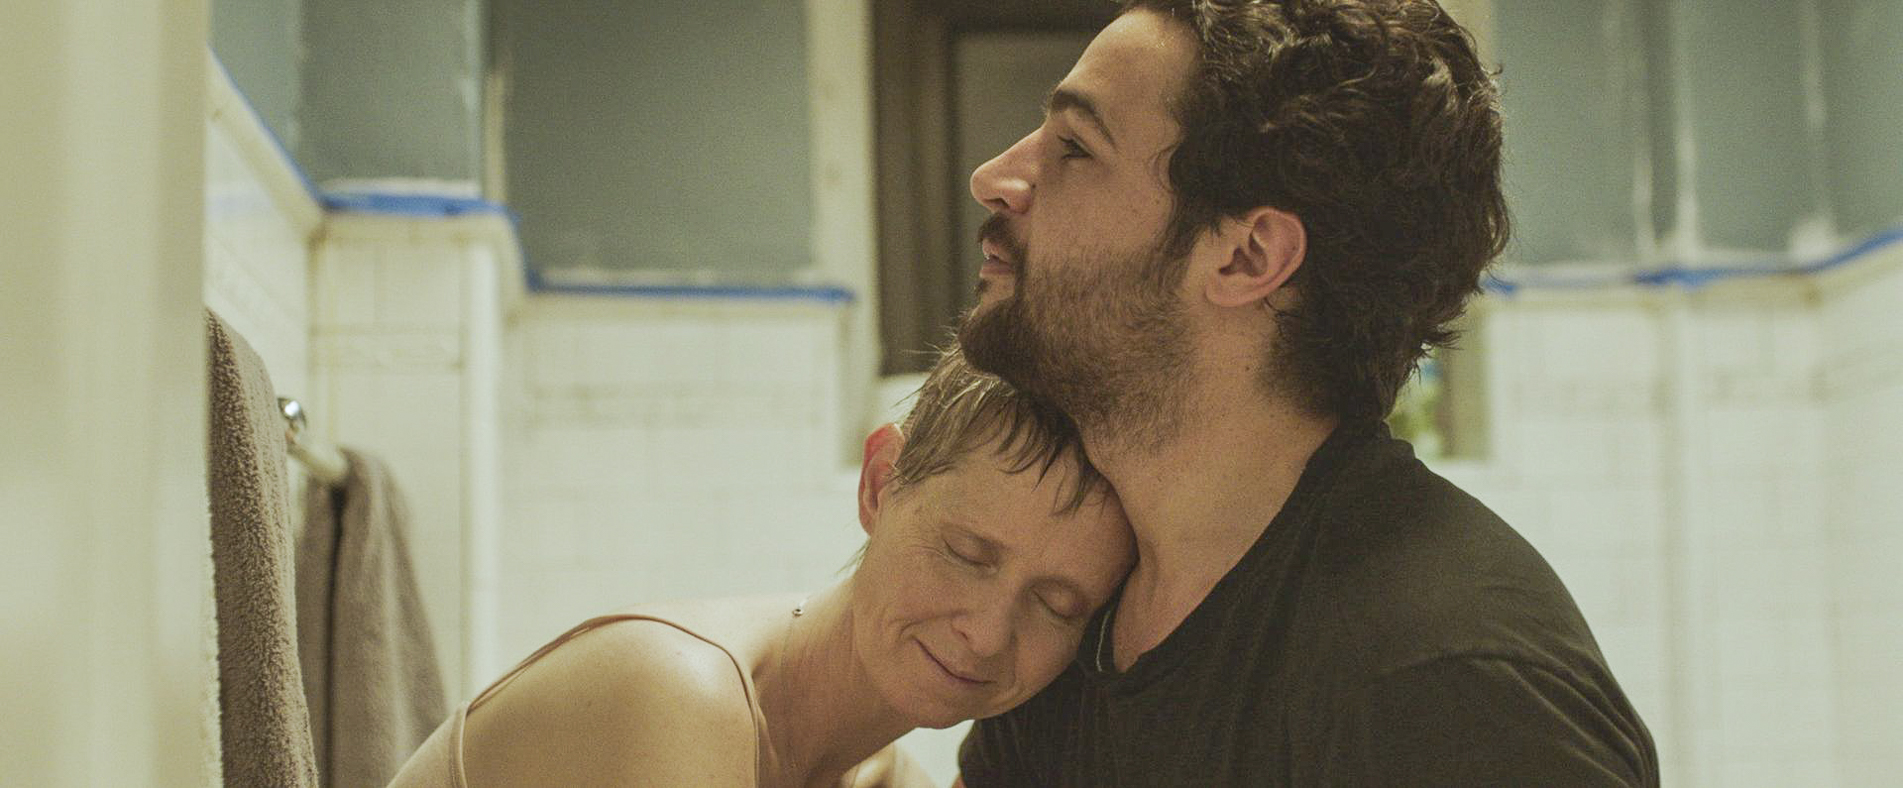 Christopher Abbott and Cynthia Nixon in a still from James White